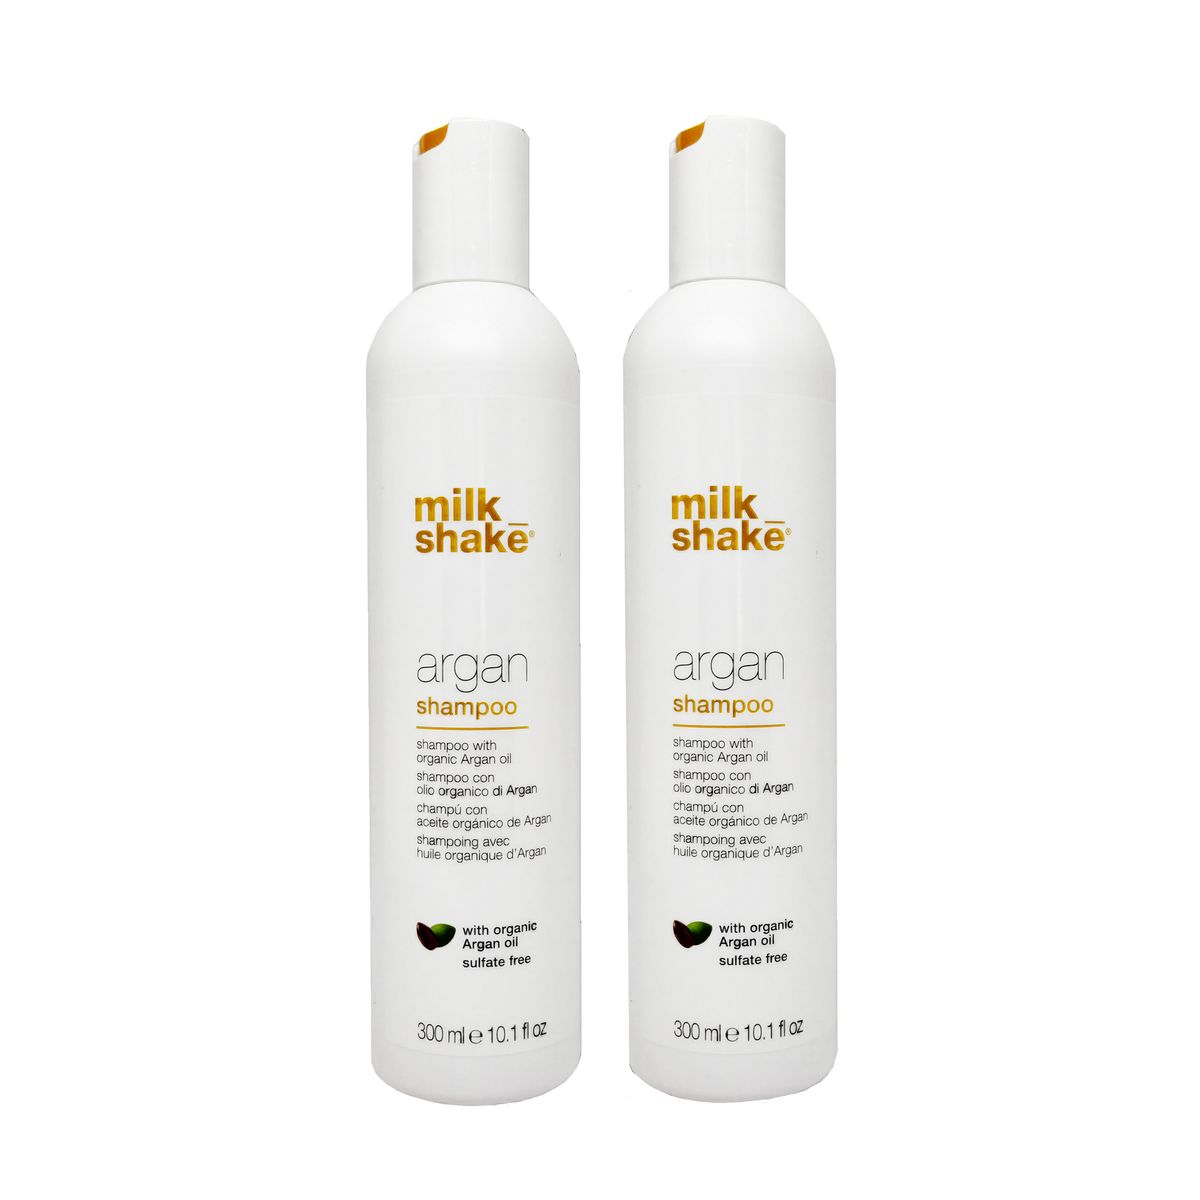 Argan Shampoo Sulphate Free Organic Double Pack | Buy Online in South | takealot.com